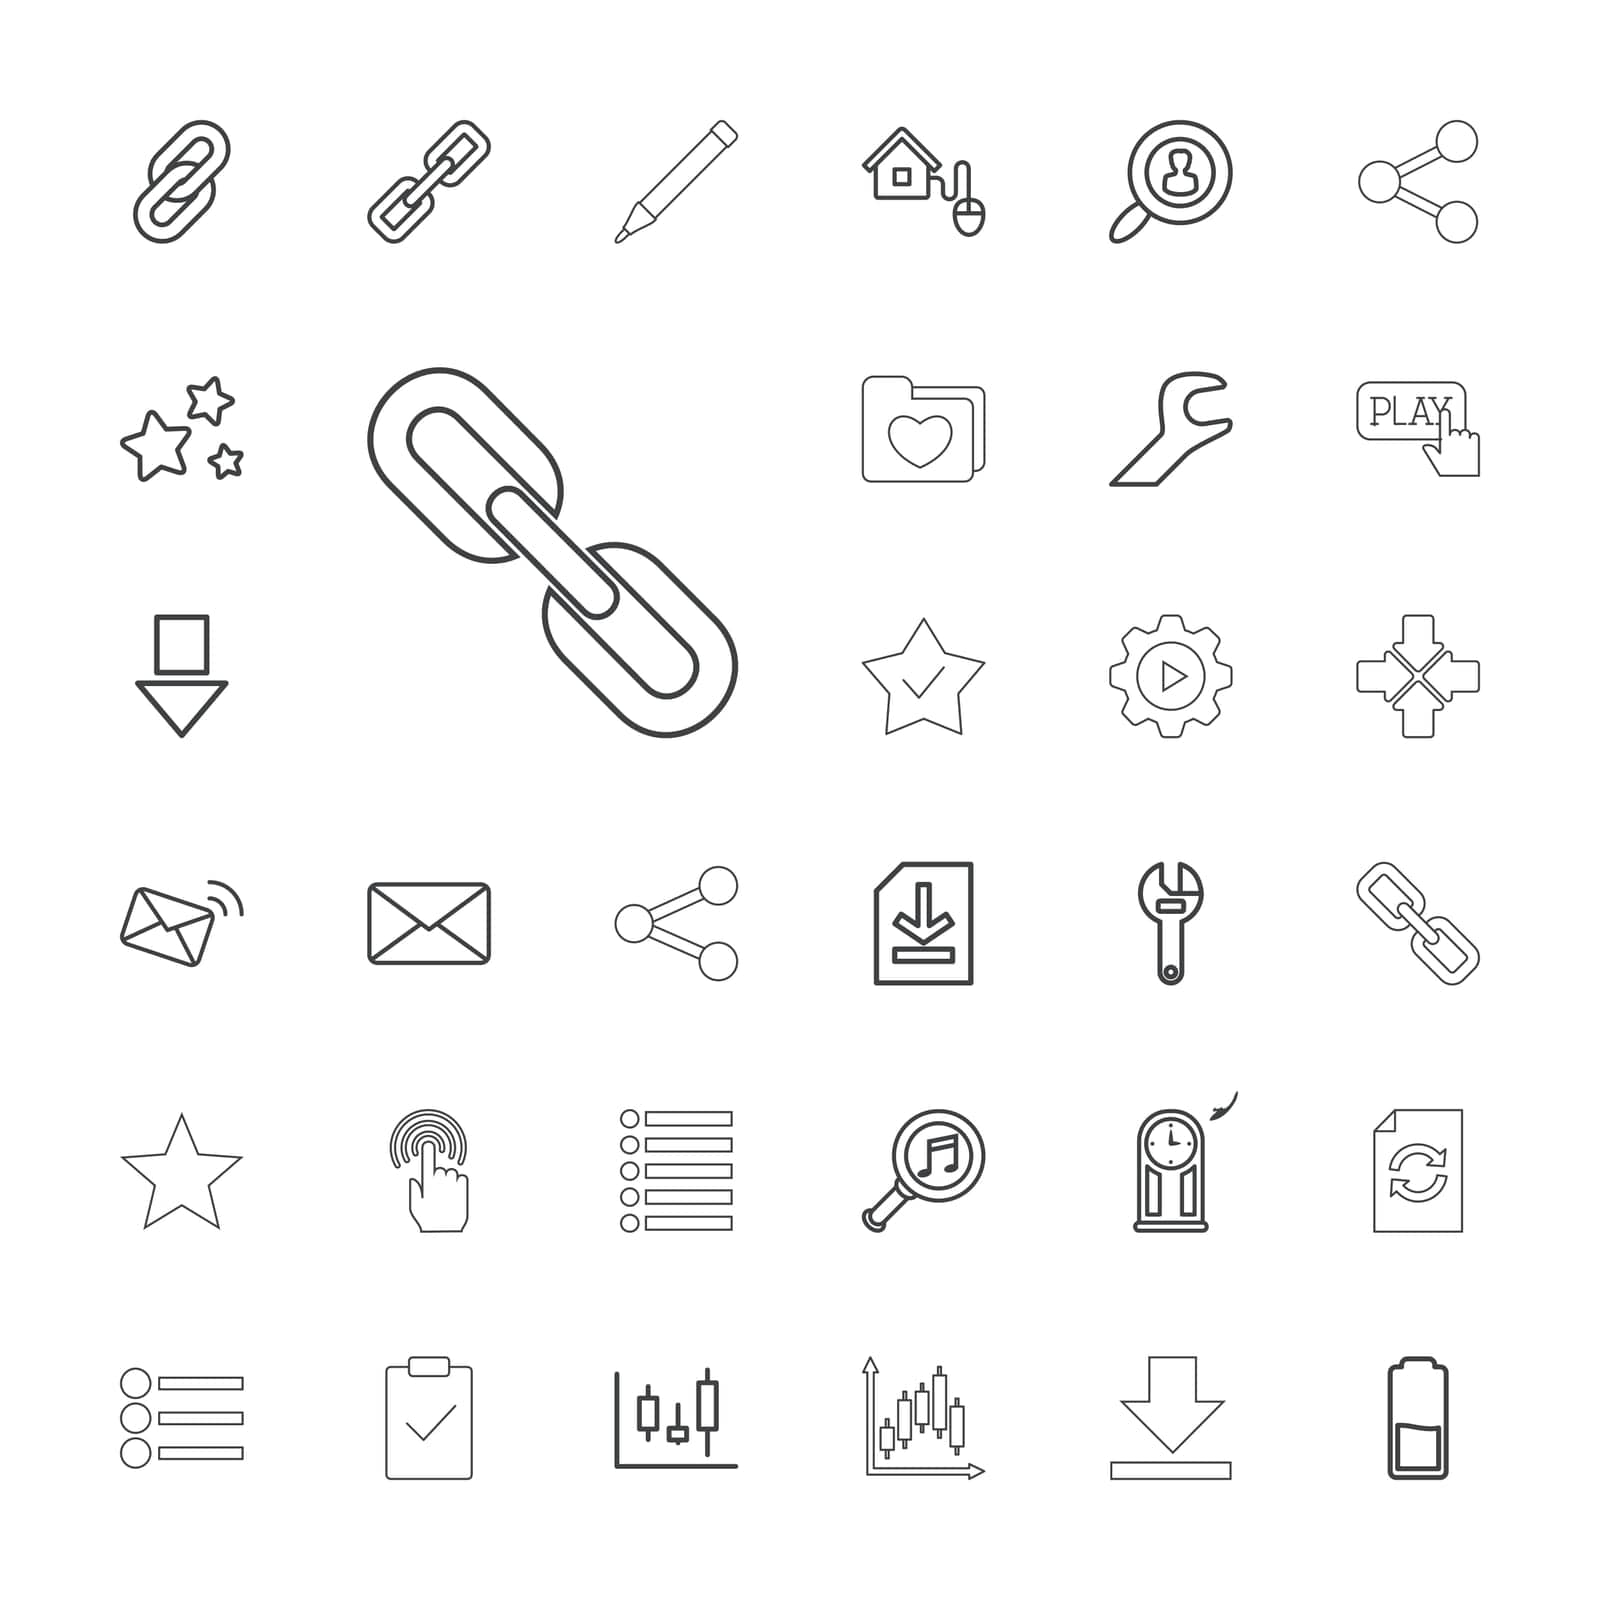 play,symbol,mail,arrow,icon,sign,link,battery,interface,down,clipboard,smart,button,download,search,pressing,music,file,reload,pen,share,vector,panel,pendulum,finger,chain,move,set,star,in,serach,control,touchscreen,tick,menu,heart,home,wrench,with,folder,user,gear by ogqcorp